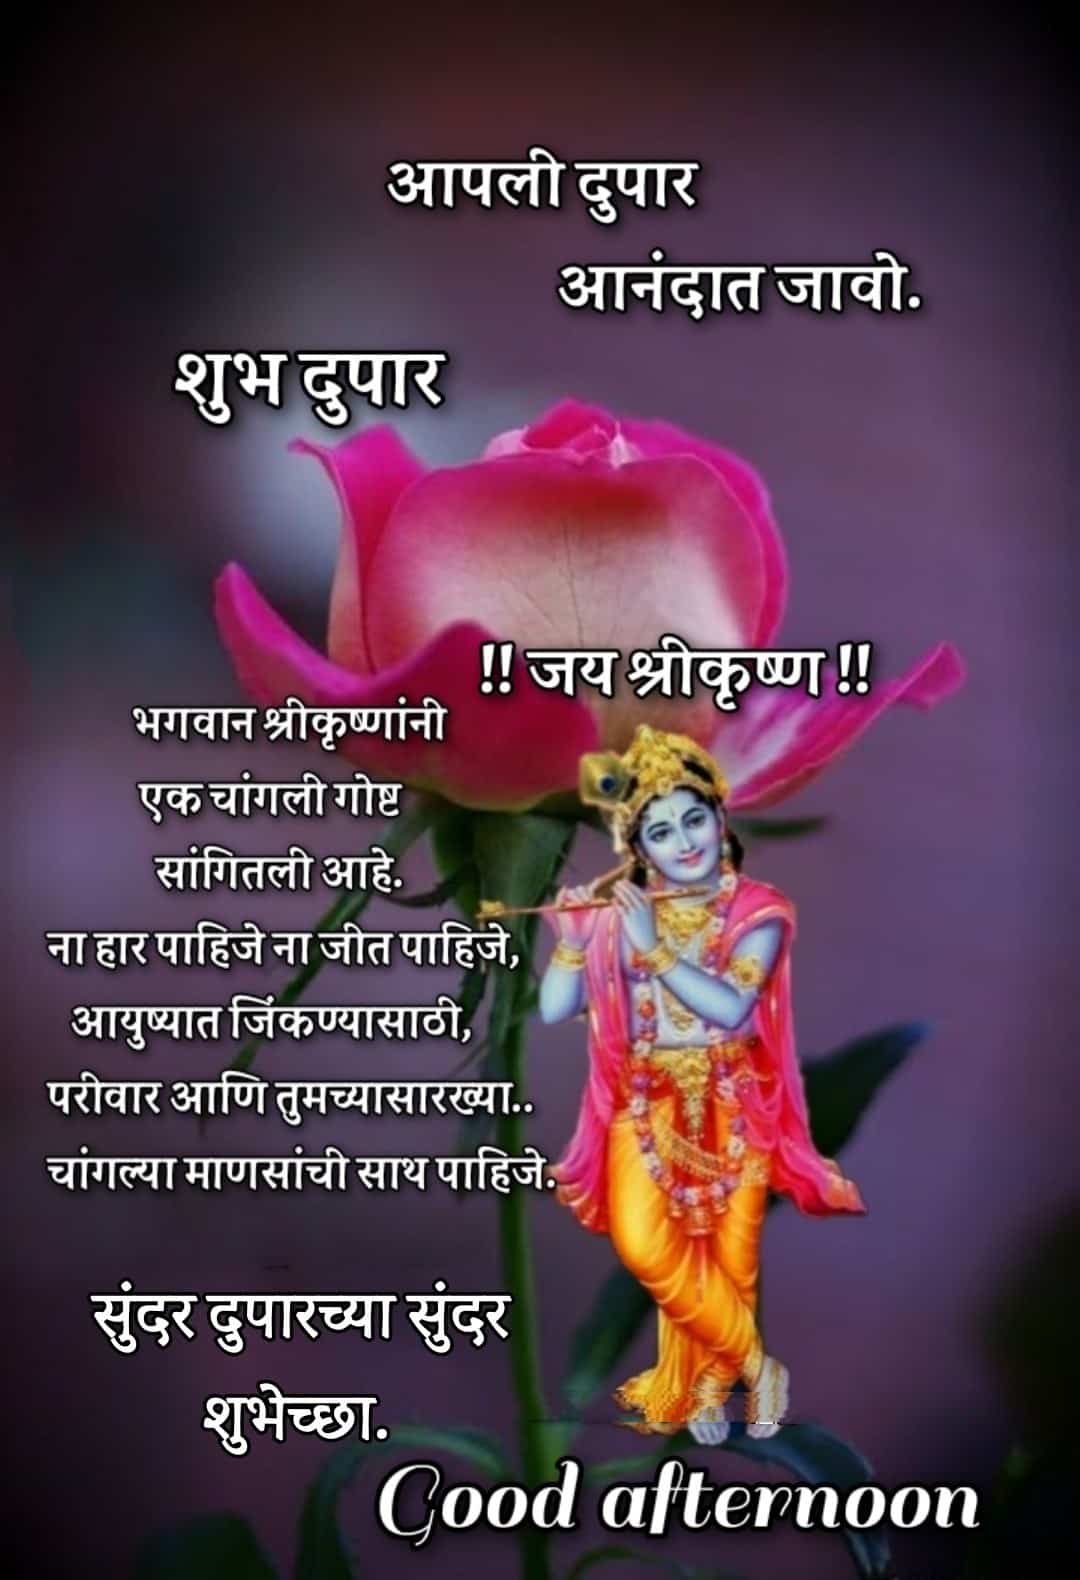 शुभ दुपार सुविचार,शुभ दुपार संदेश,Good Afternoon In Marathi SMS